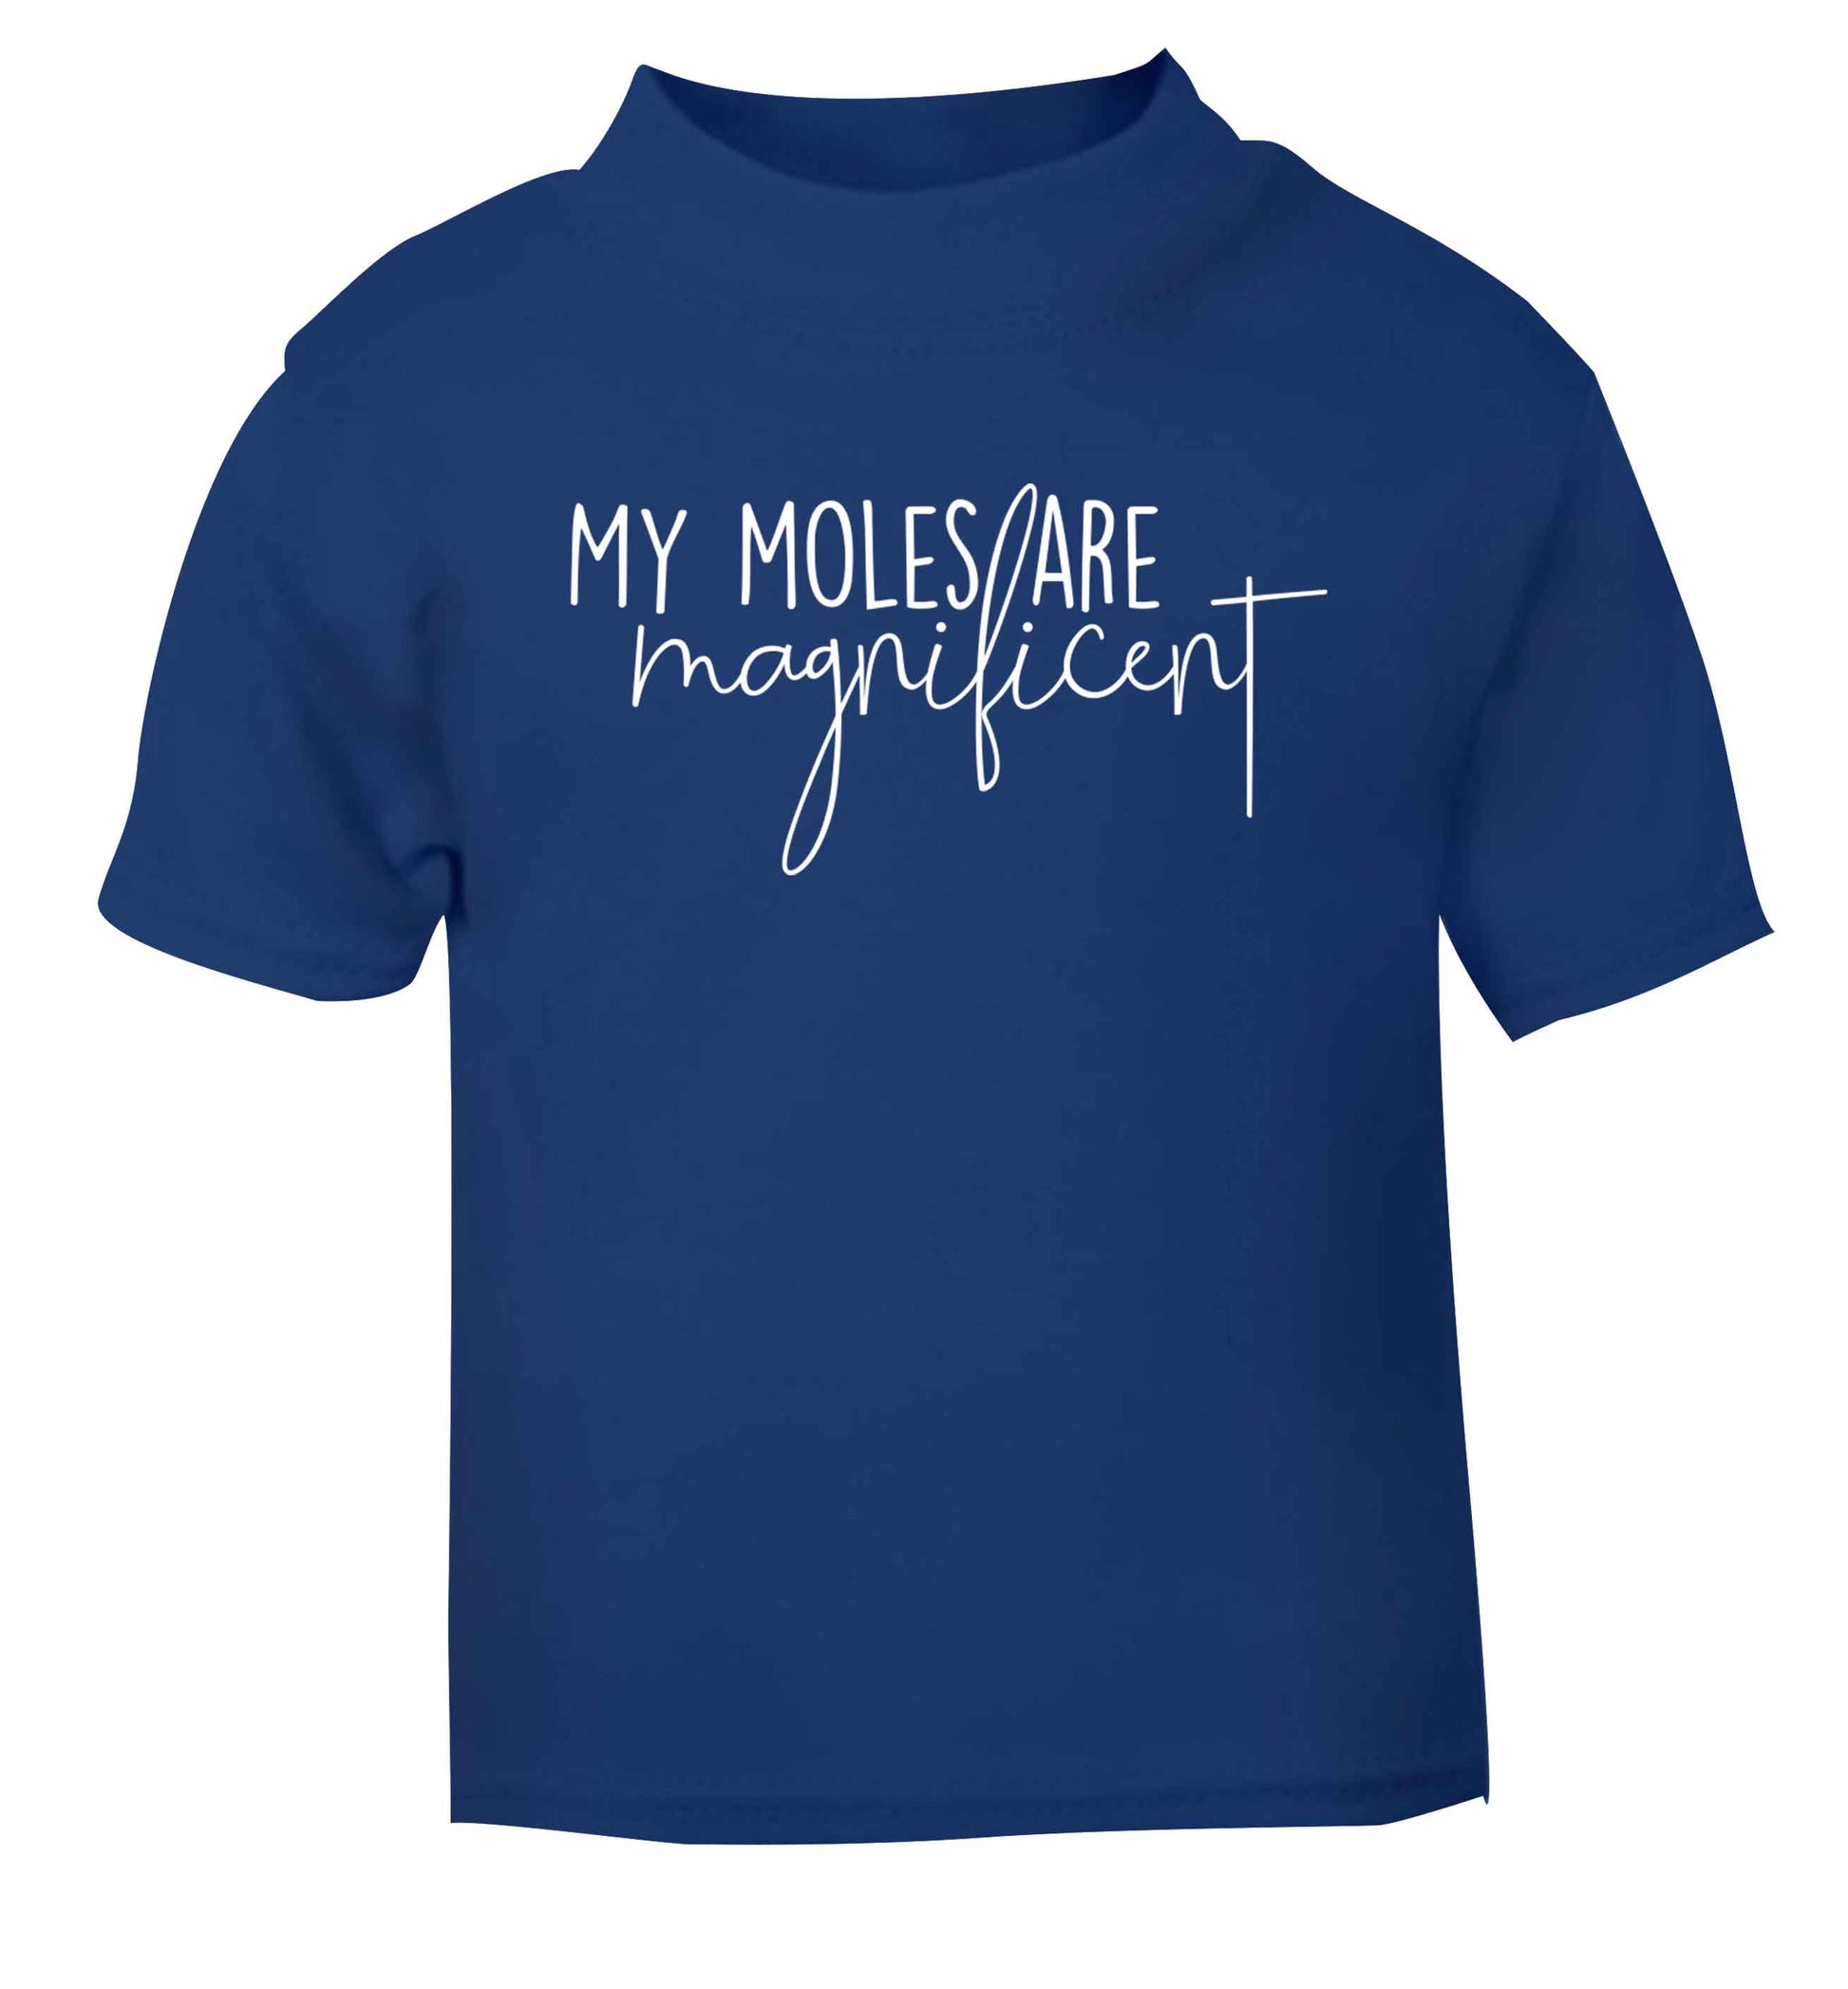 My moles are magnificent blue baby toddler Tshirt 2 Years